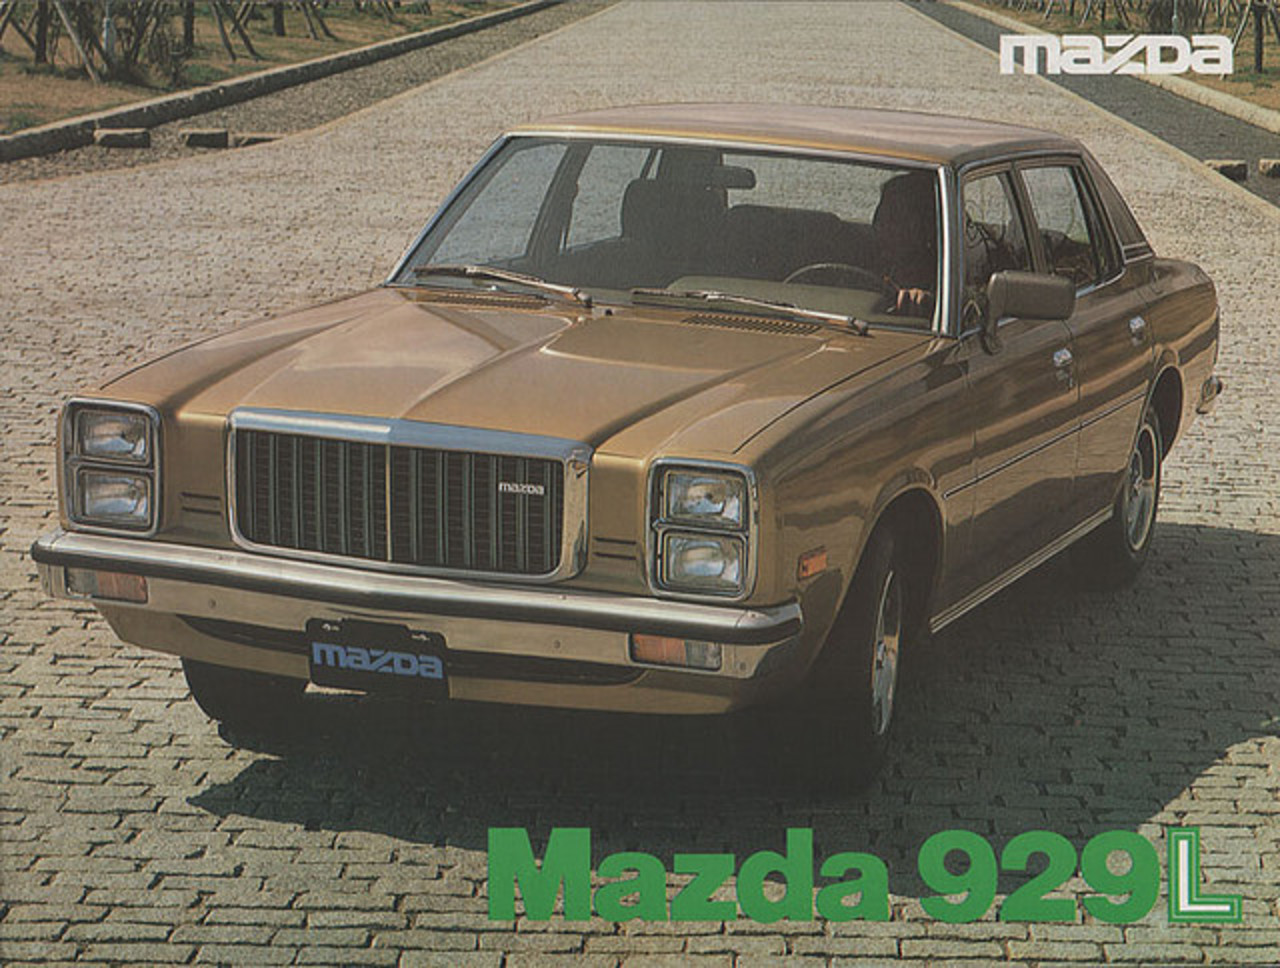 Mazda 929L saloon. I love the stacked lights on this model.